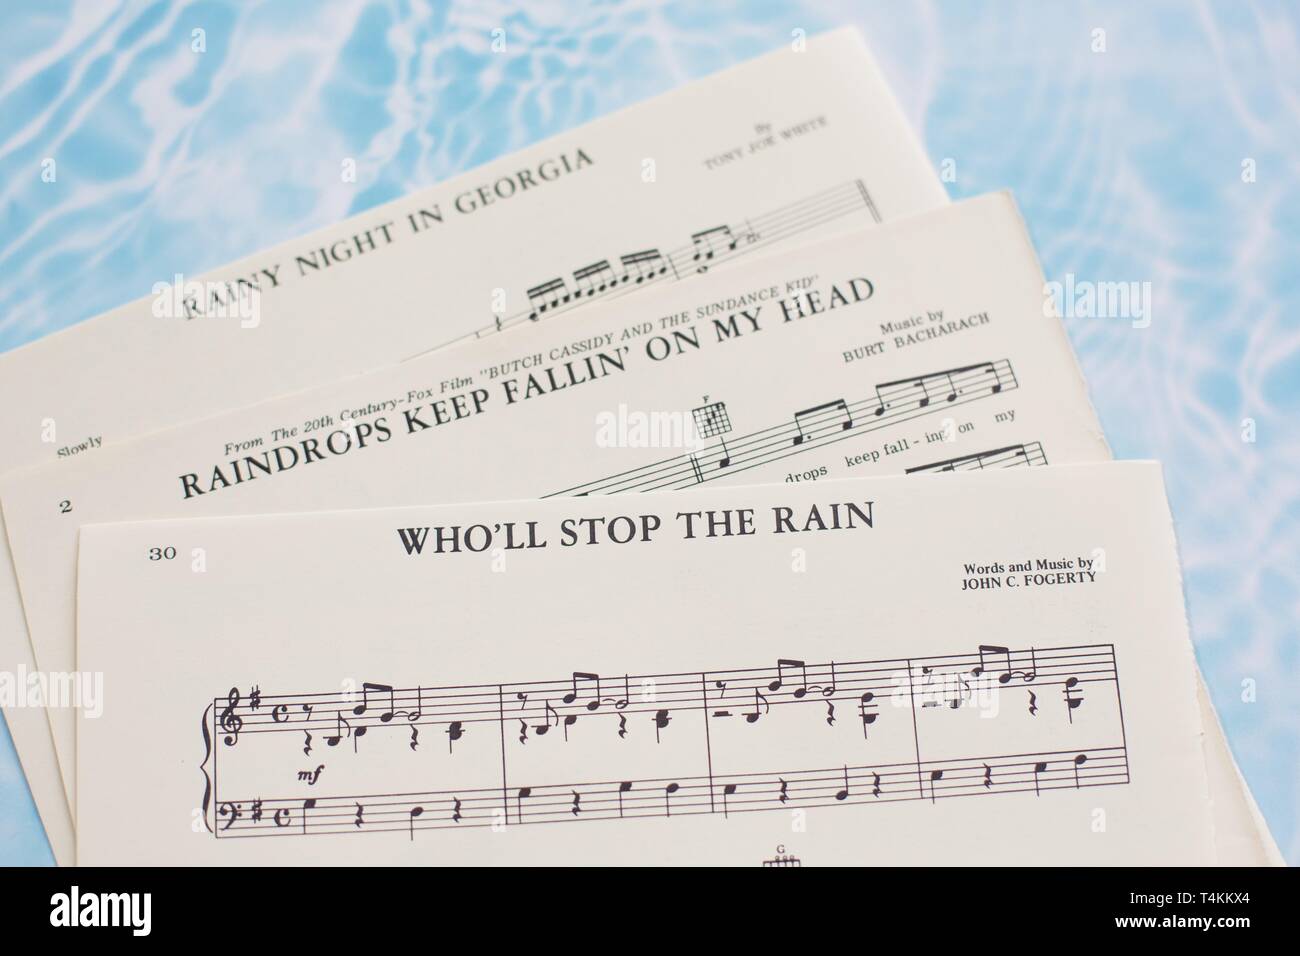 Sheet music with songs about rain. Stock Photo